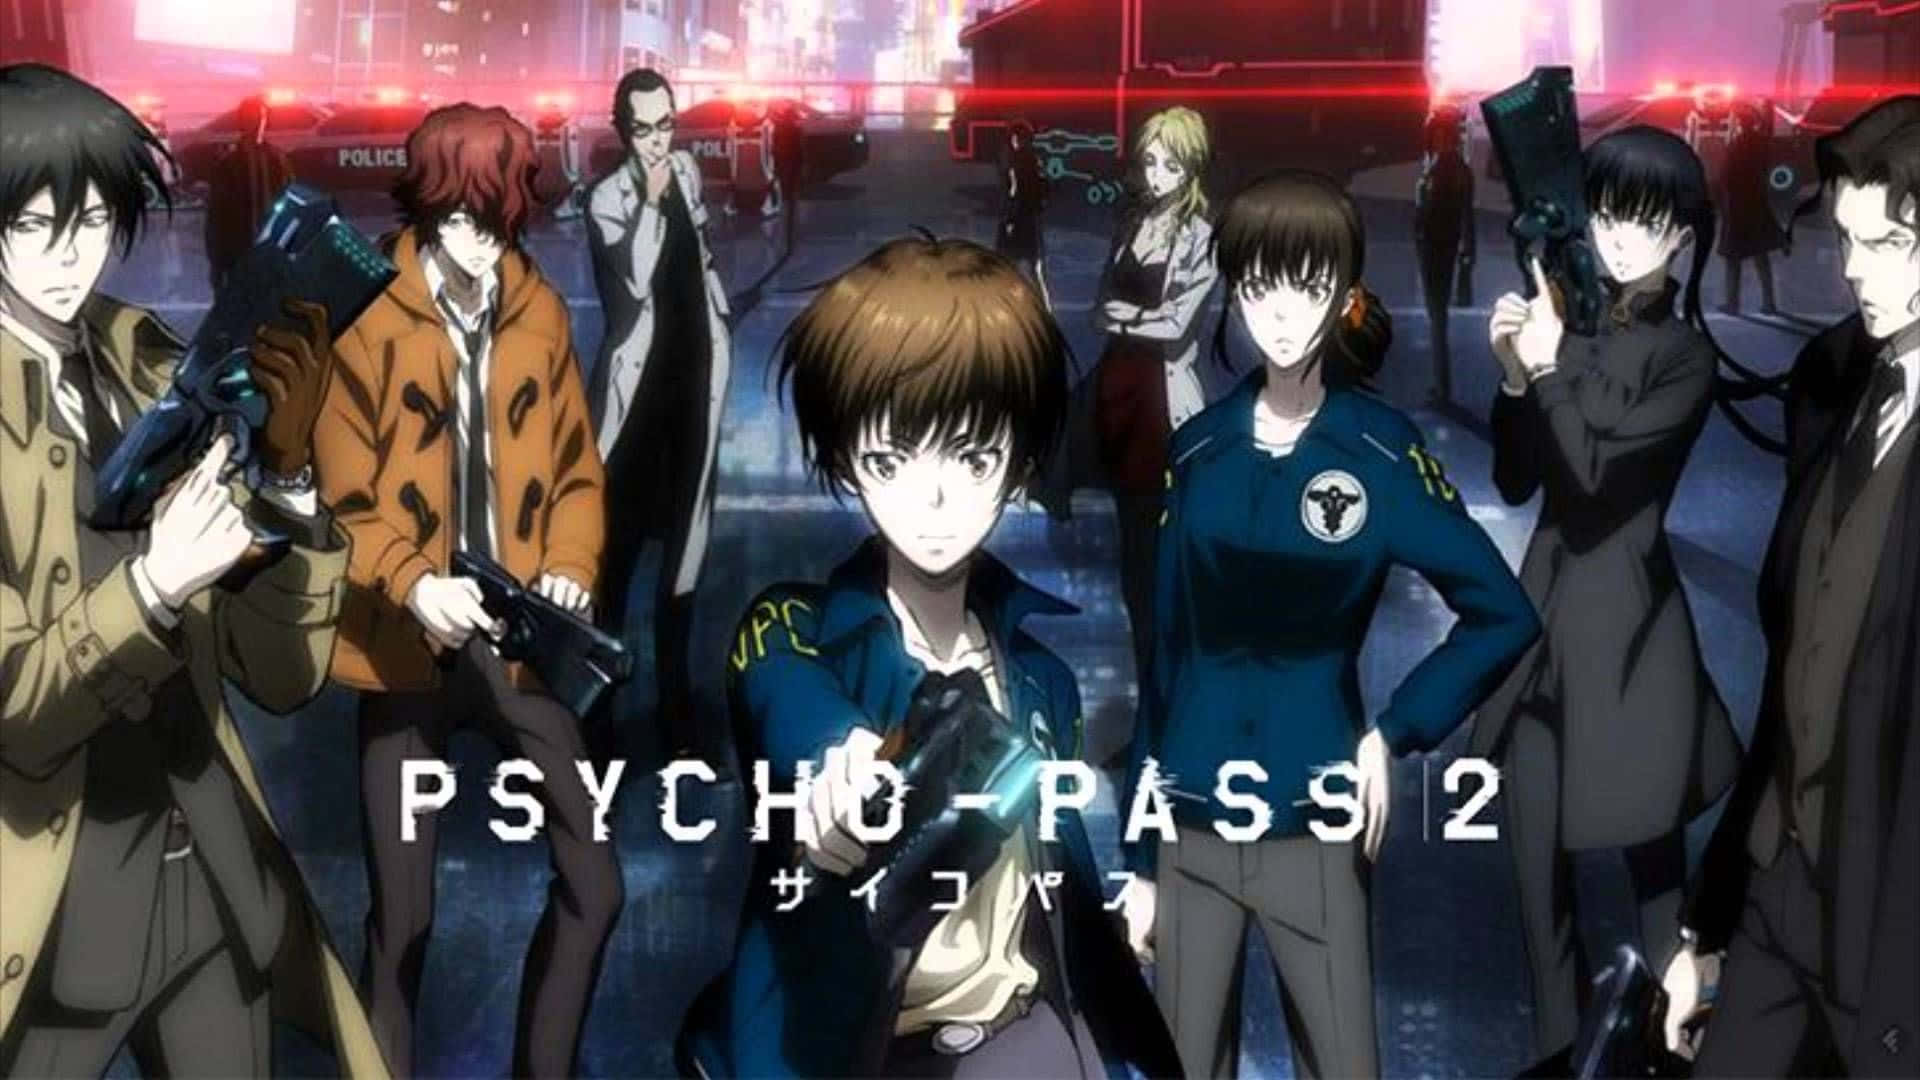 “discover The Darker Side Of The Future With Psycho Pass” Background